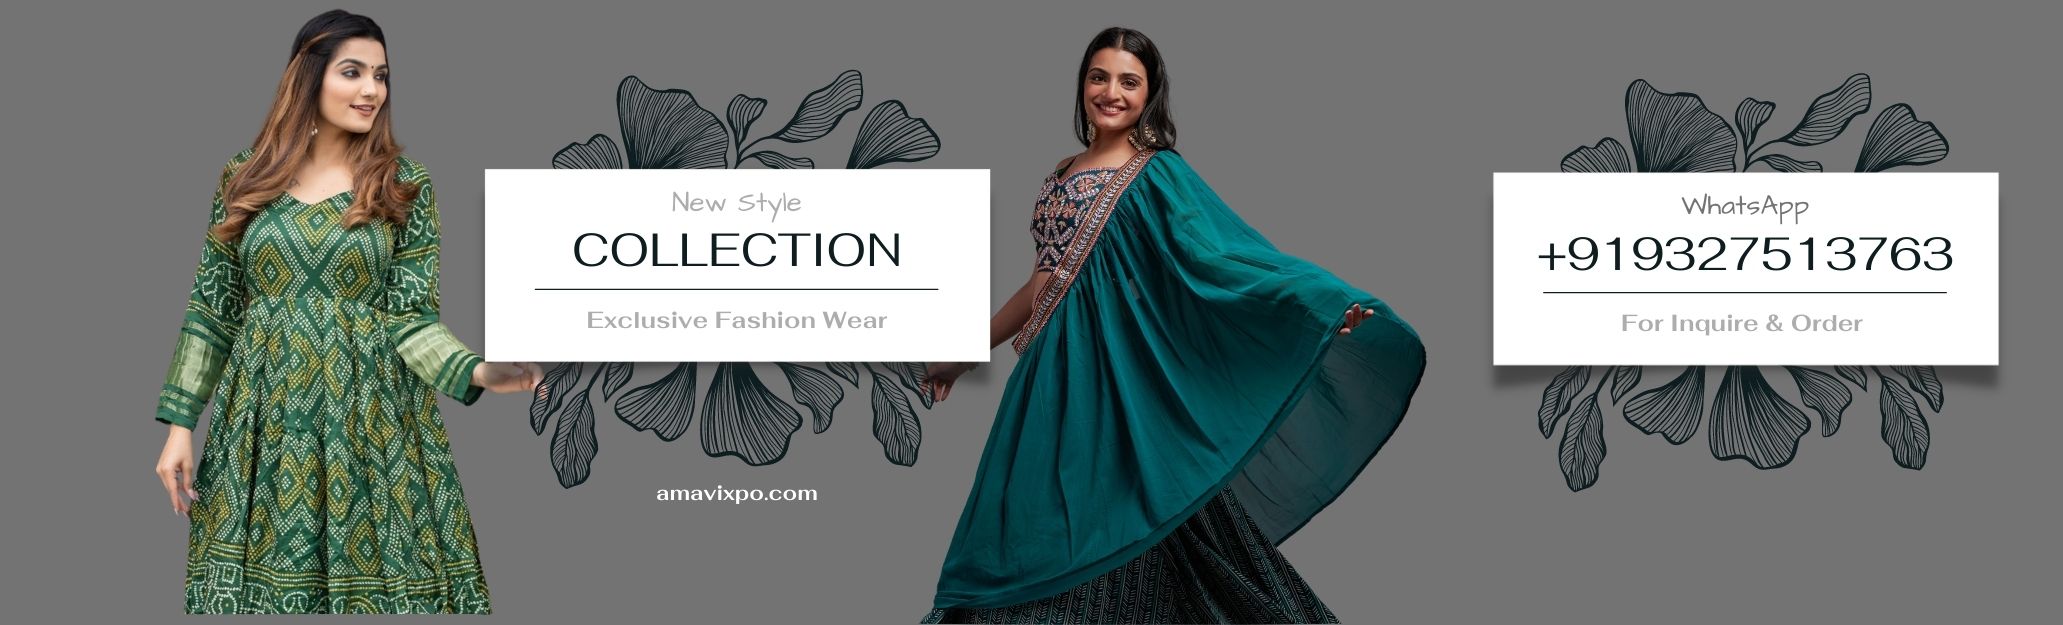 Amavi Expo New Style Collection